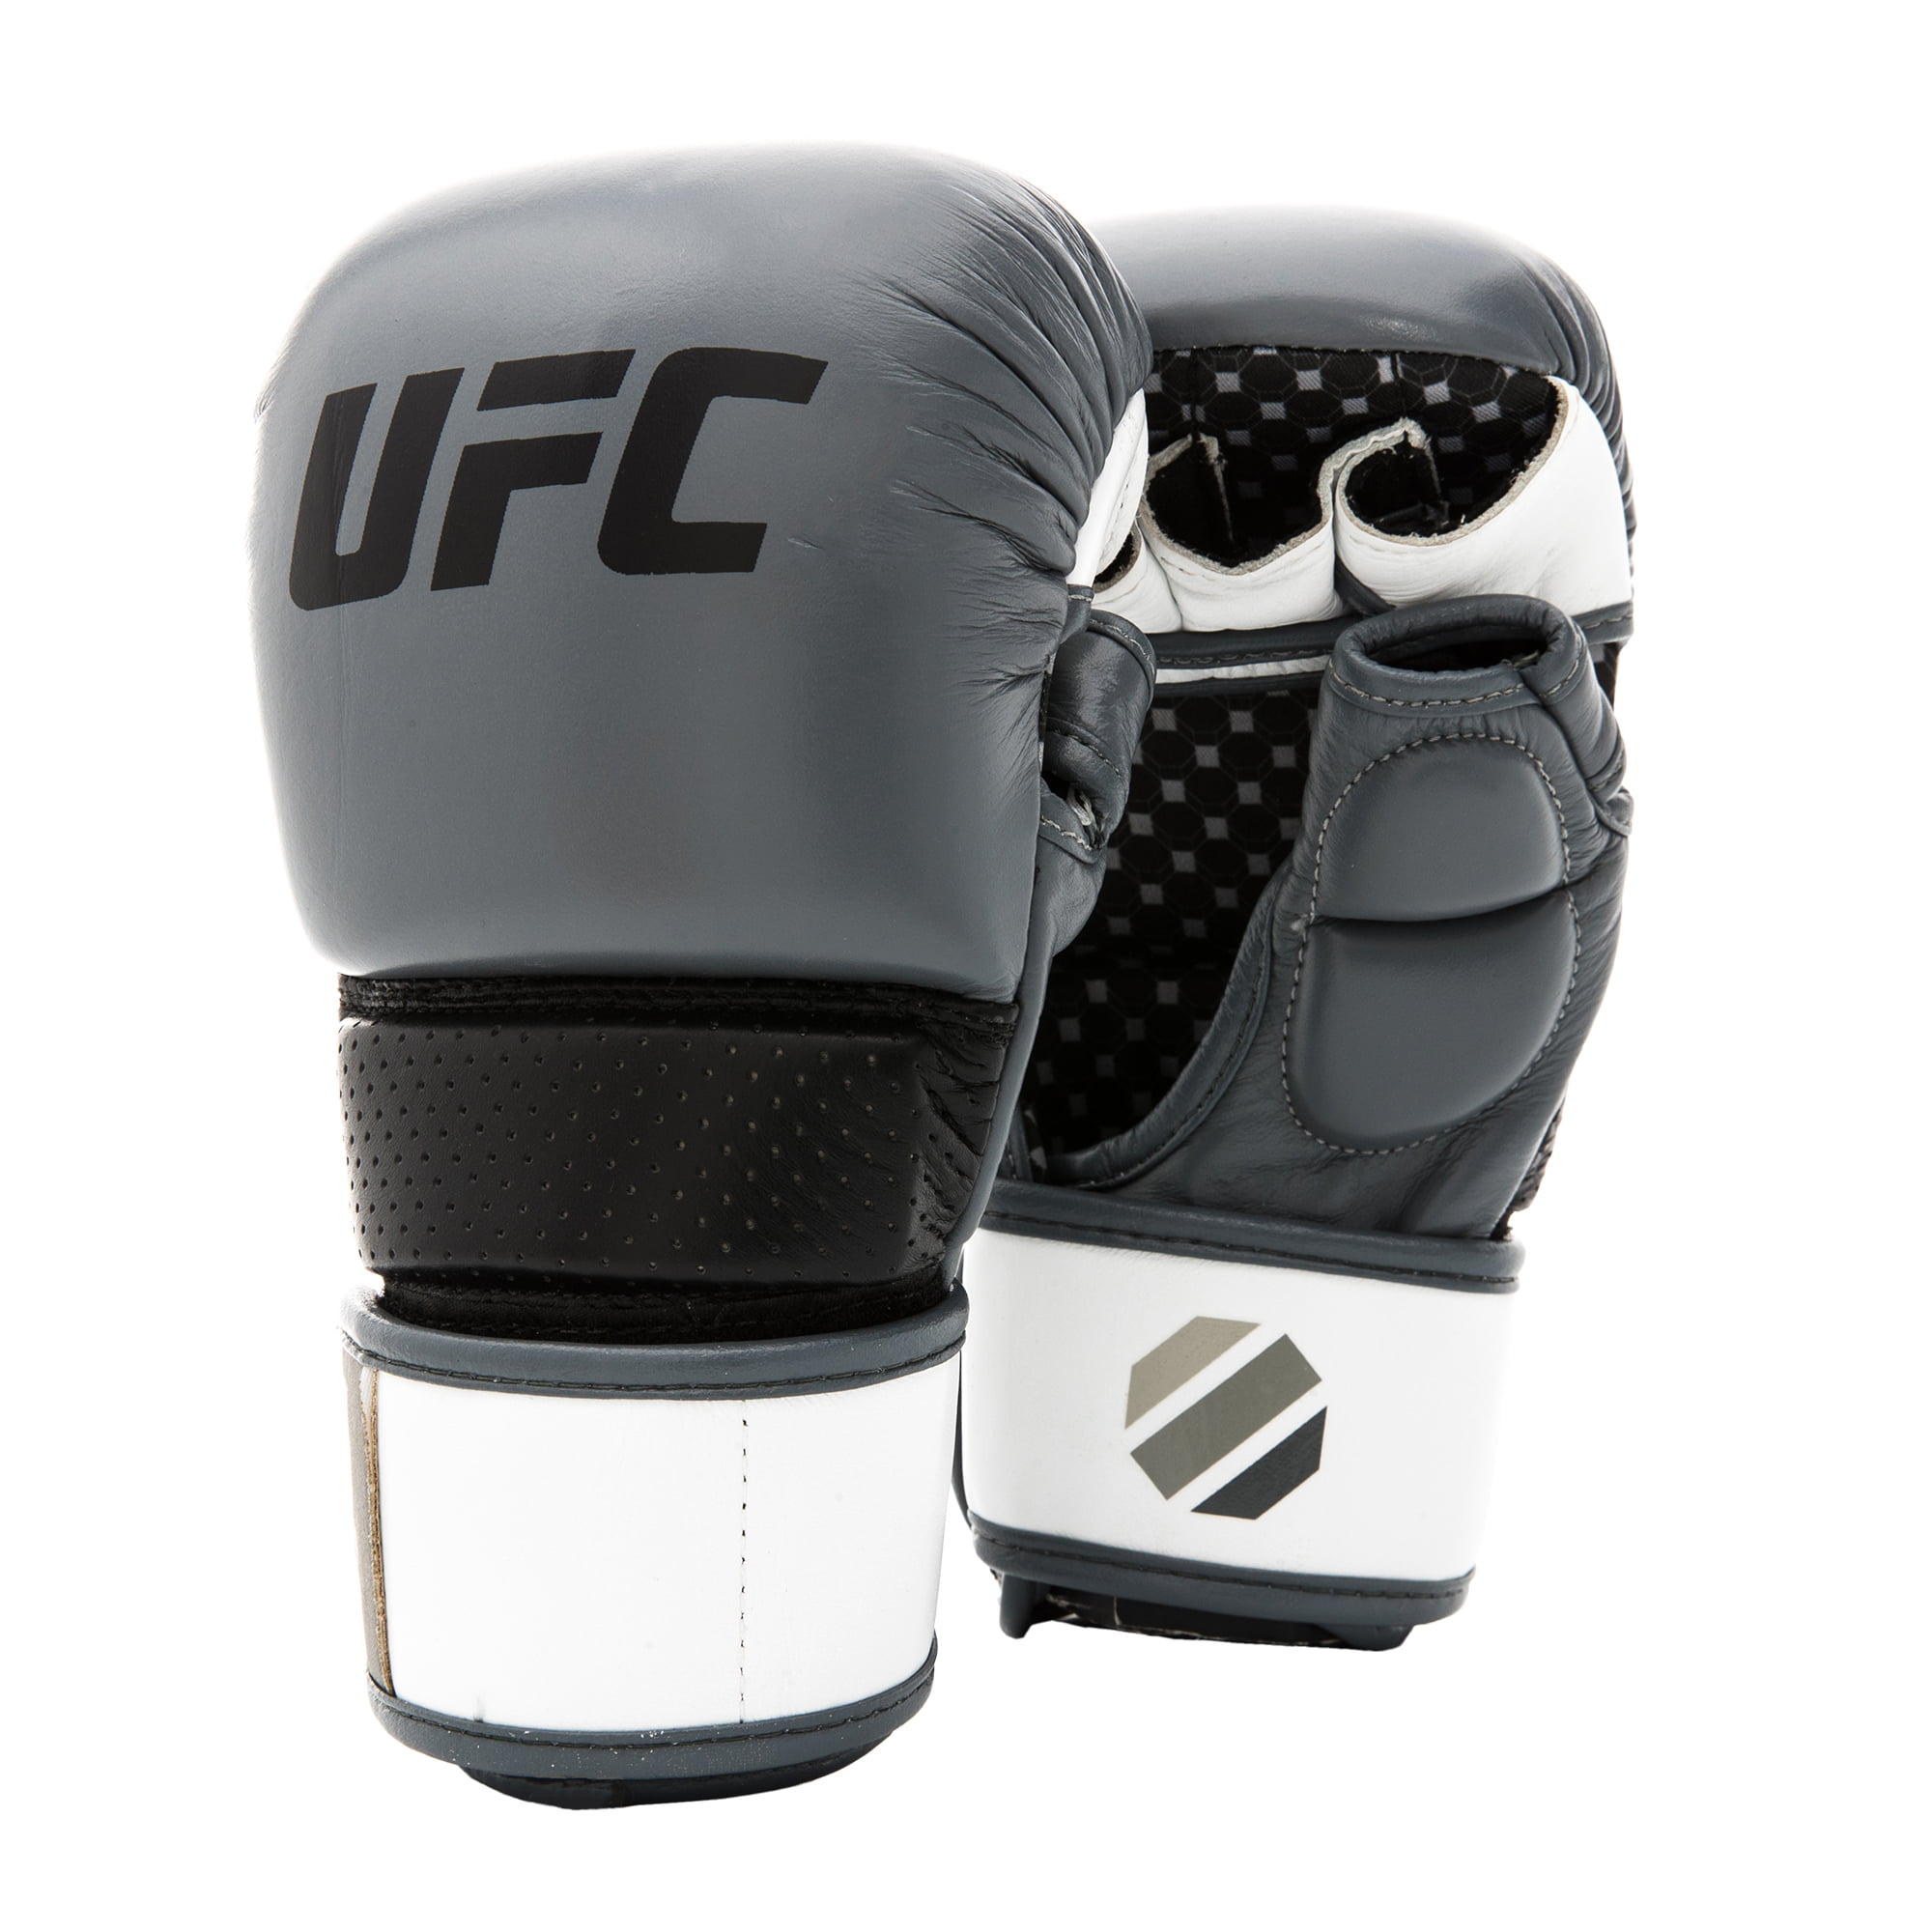 Ufc Martial Arts Sports kids Leather Fitness Boxing Gloves Hand Protector XS XL 